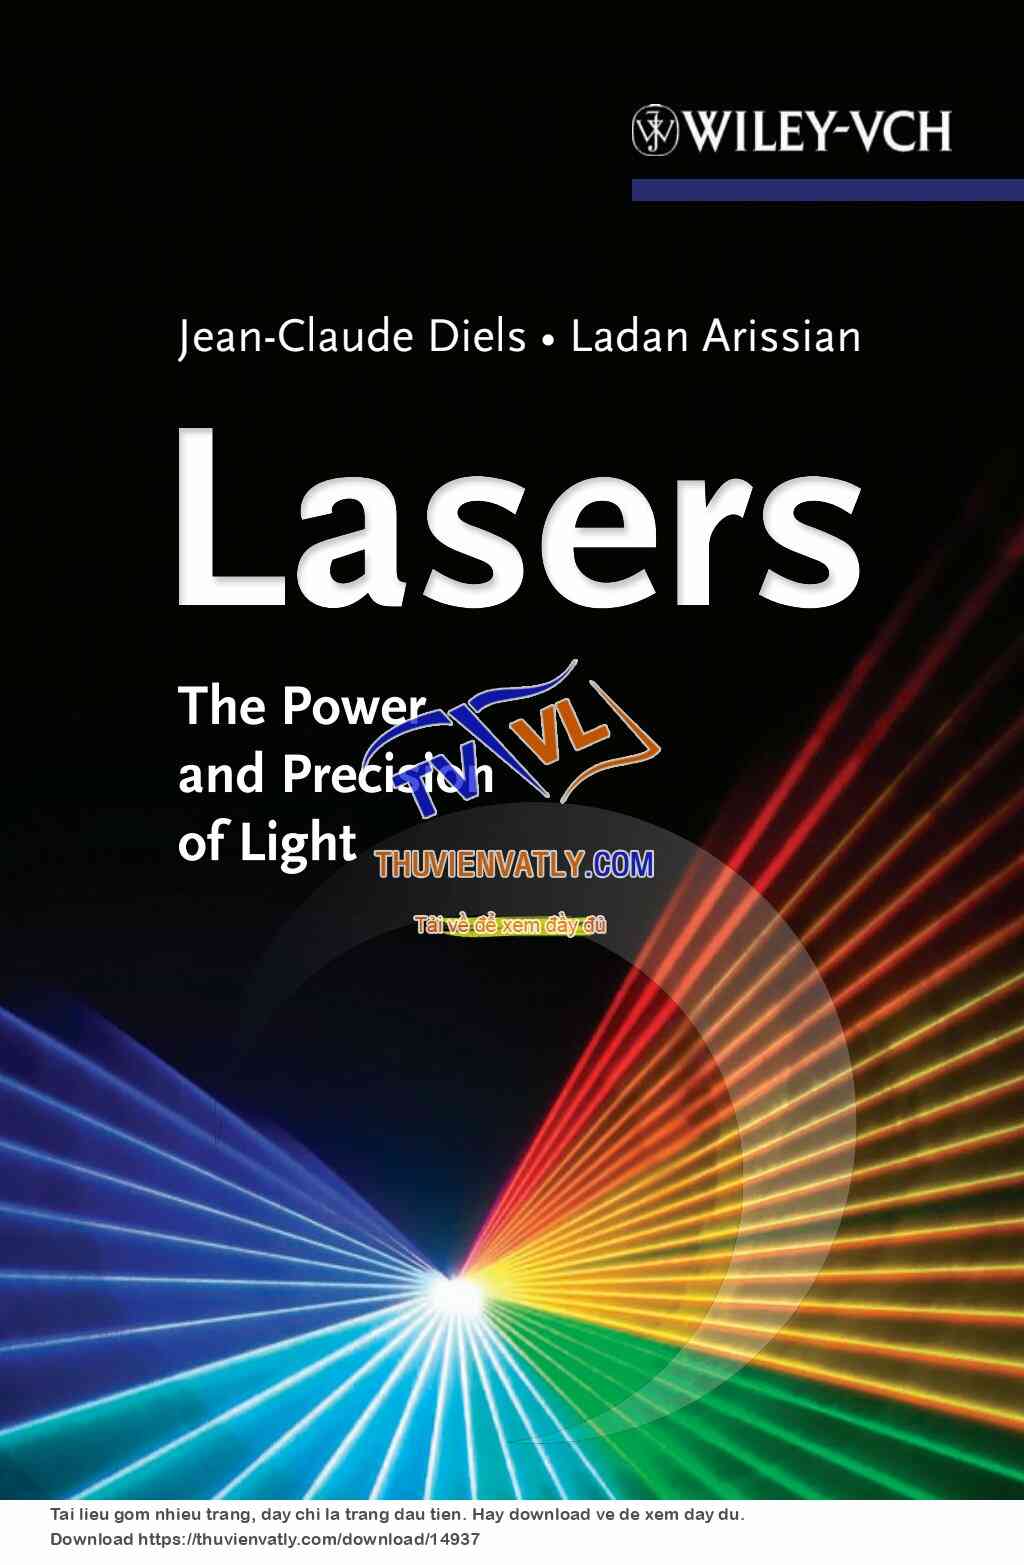 Lasers - The Power and Precision of Light - J. Diels, et. al., (Wiley-VCH, 2011).pdf